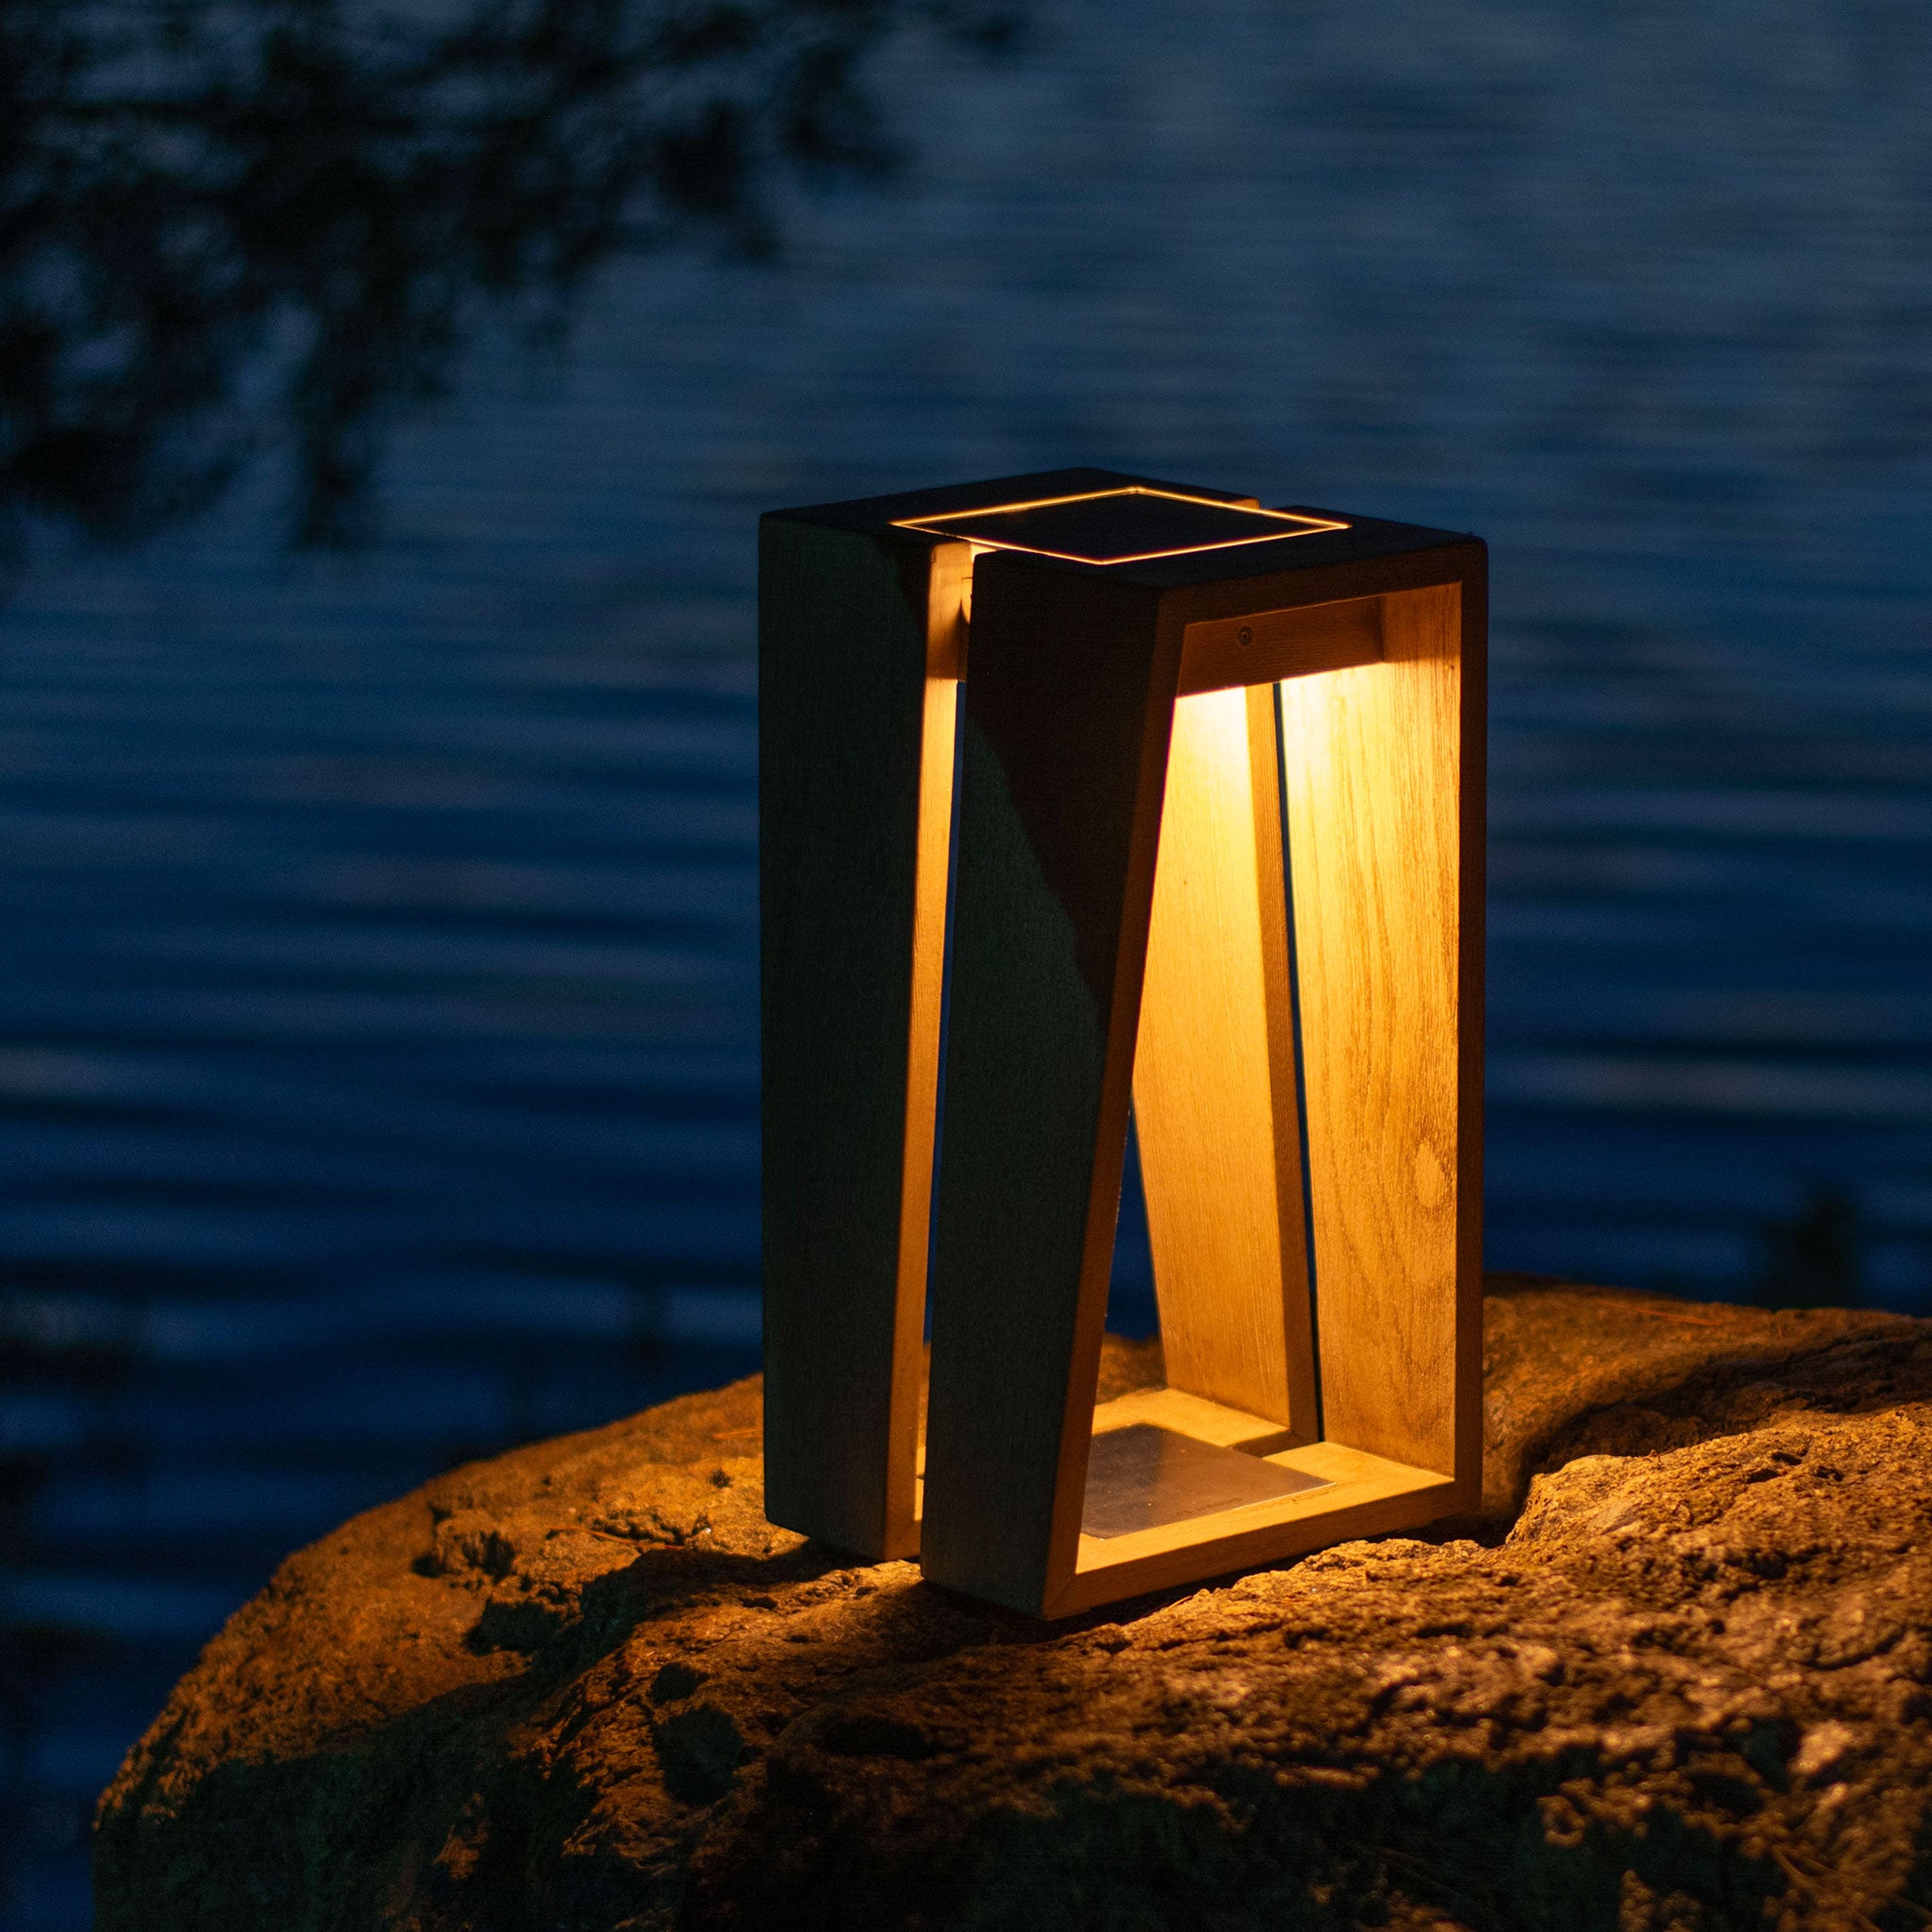 Skaal small weathered teak lantern on rock by the lake light up 